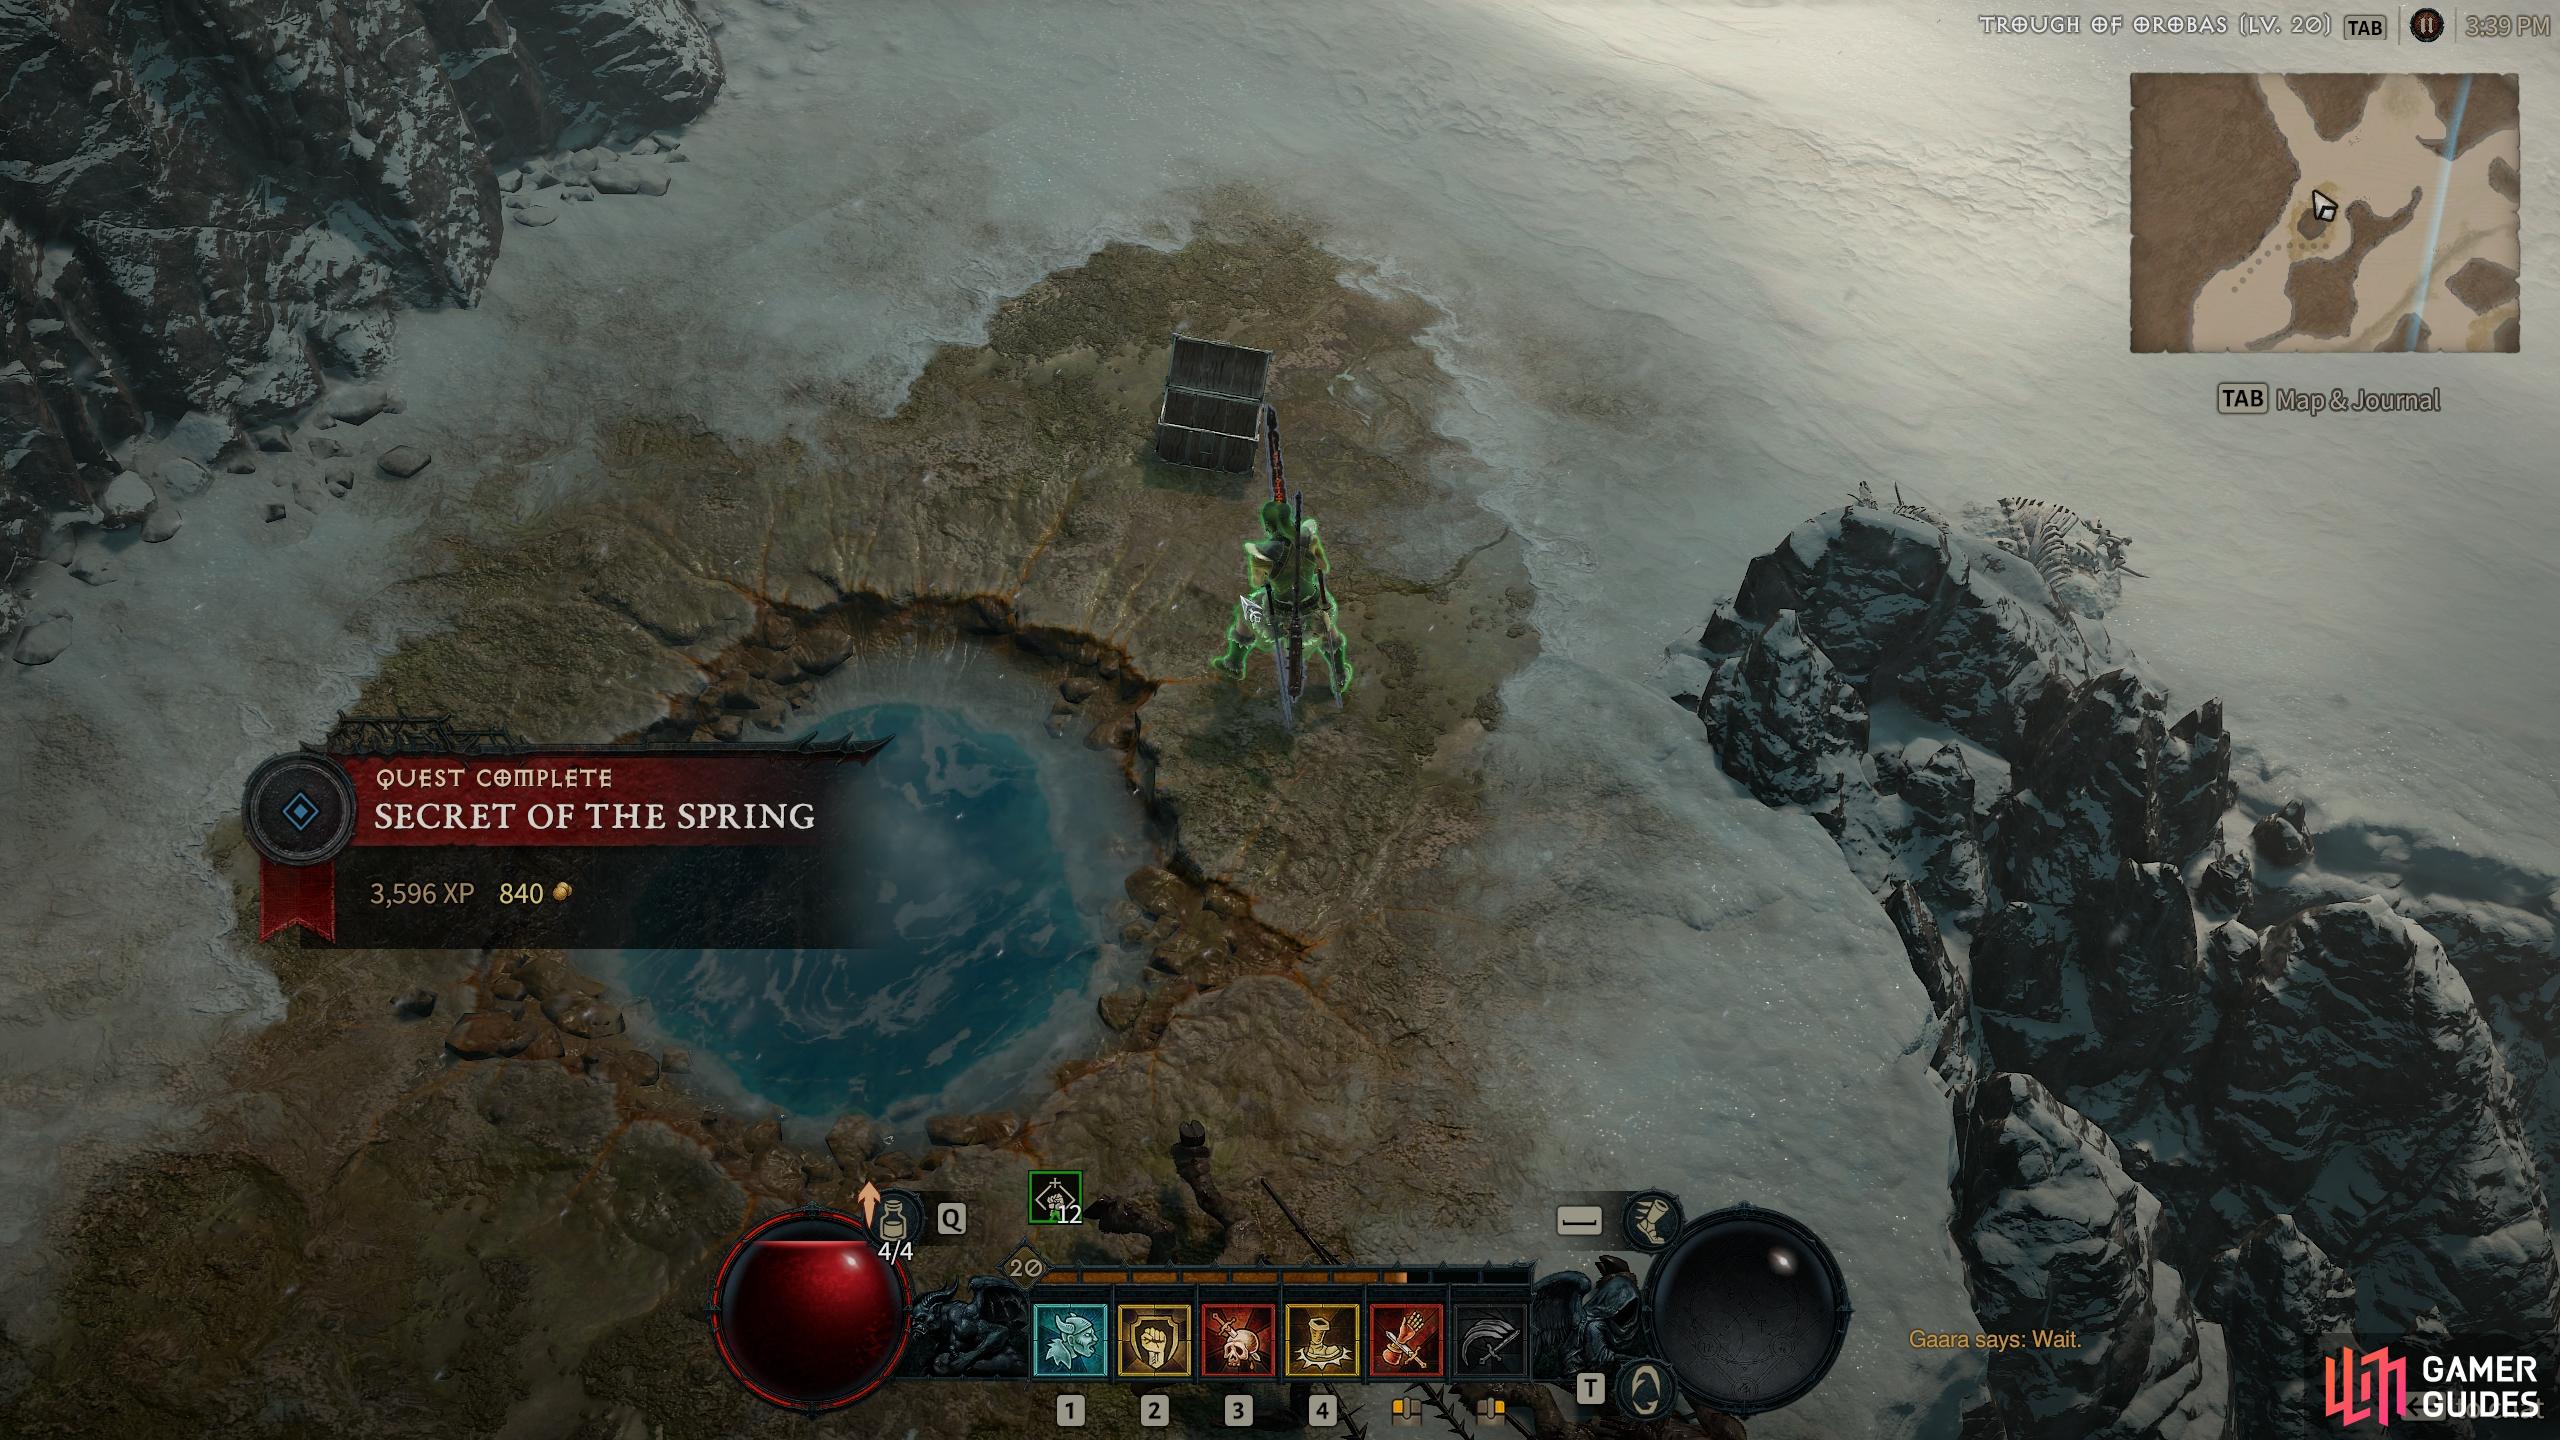 You need to use the wait emote to complete the Secrets of the Spring quest in Diablo 4.